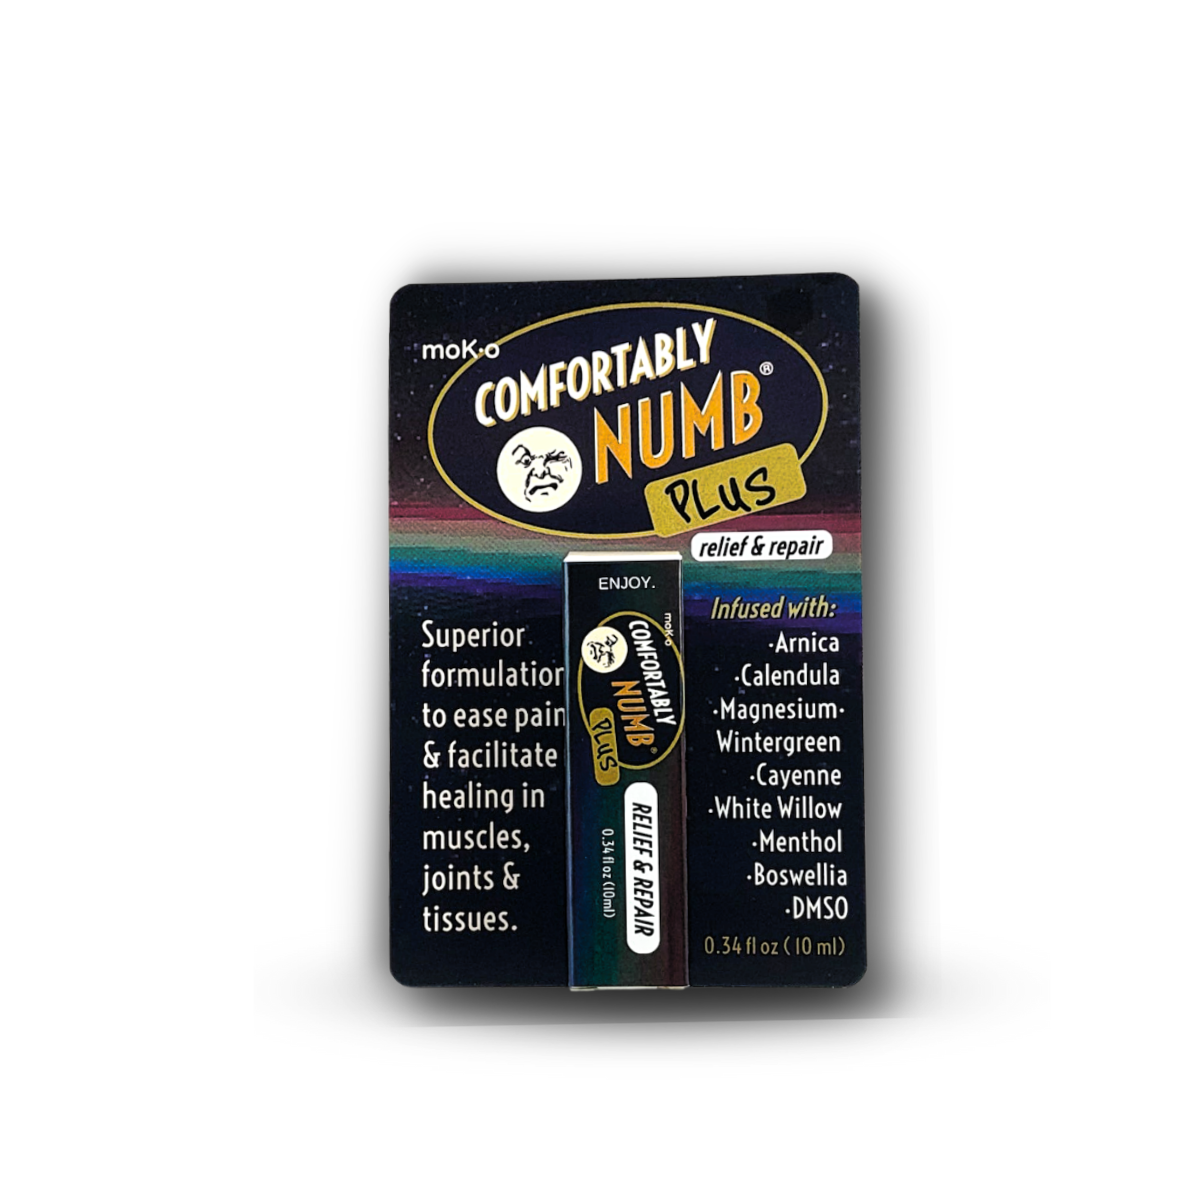 Comfortably Numb® PLUS Roll-on